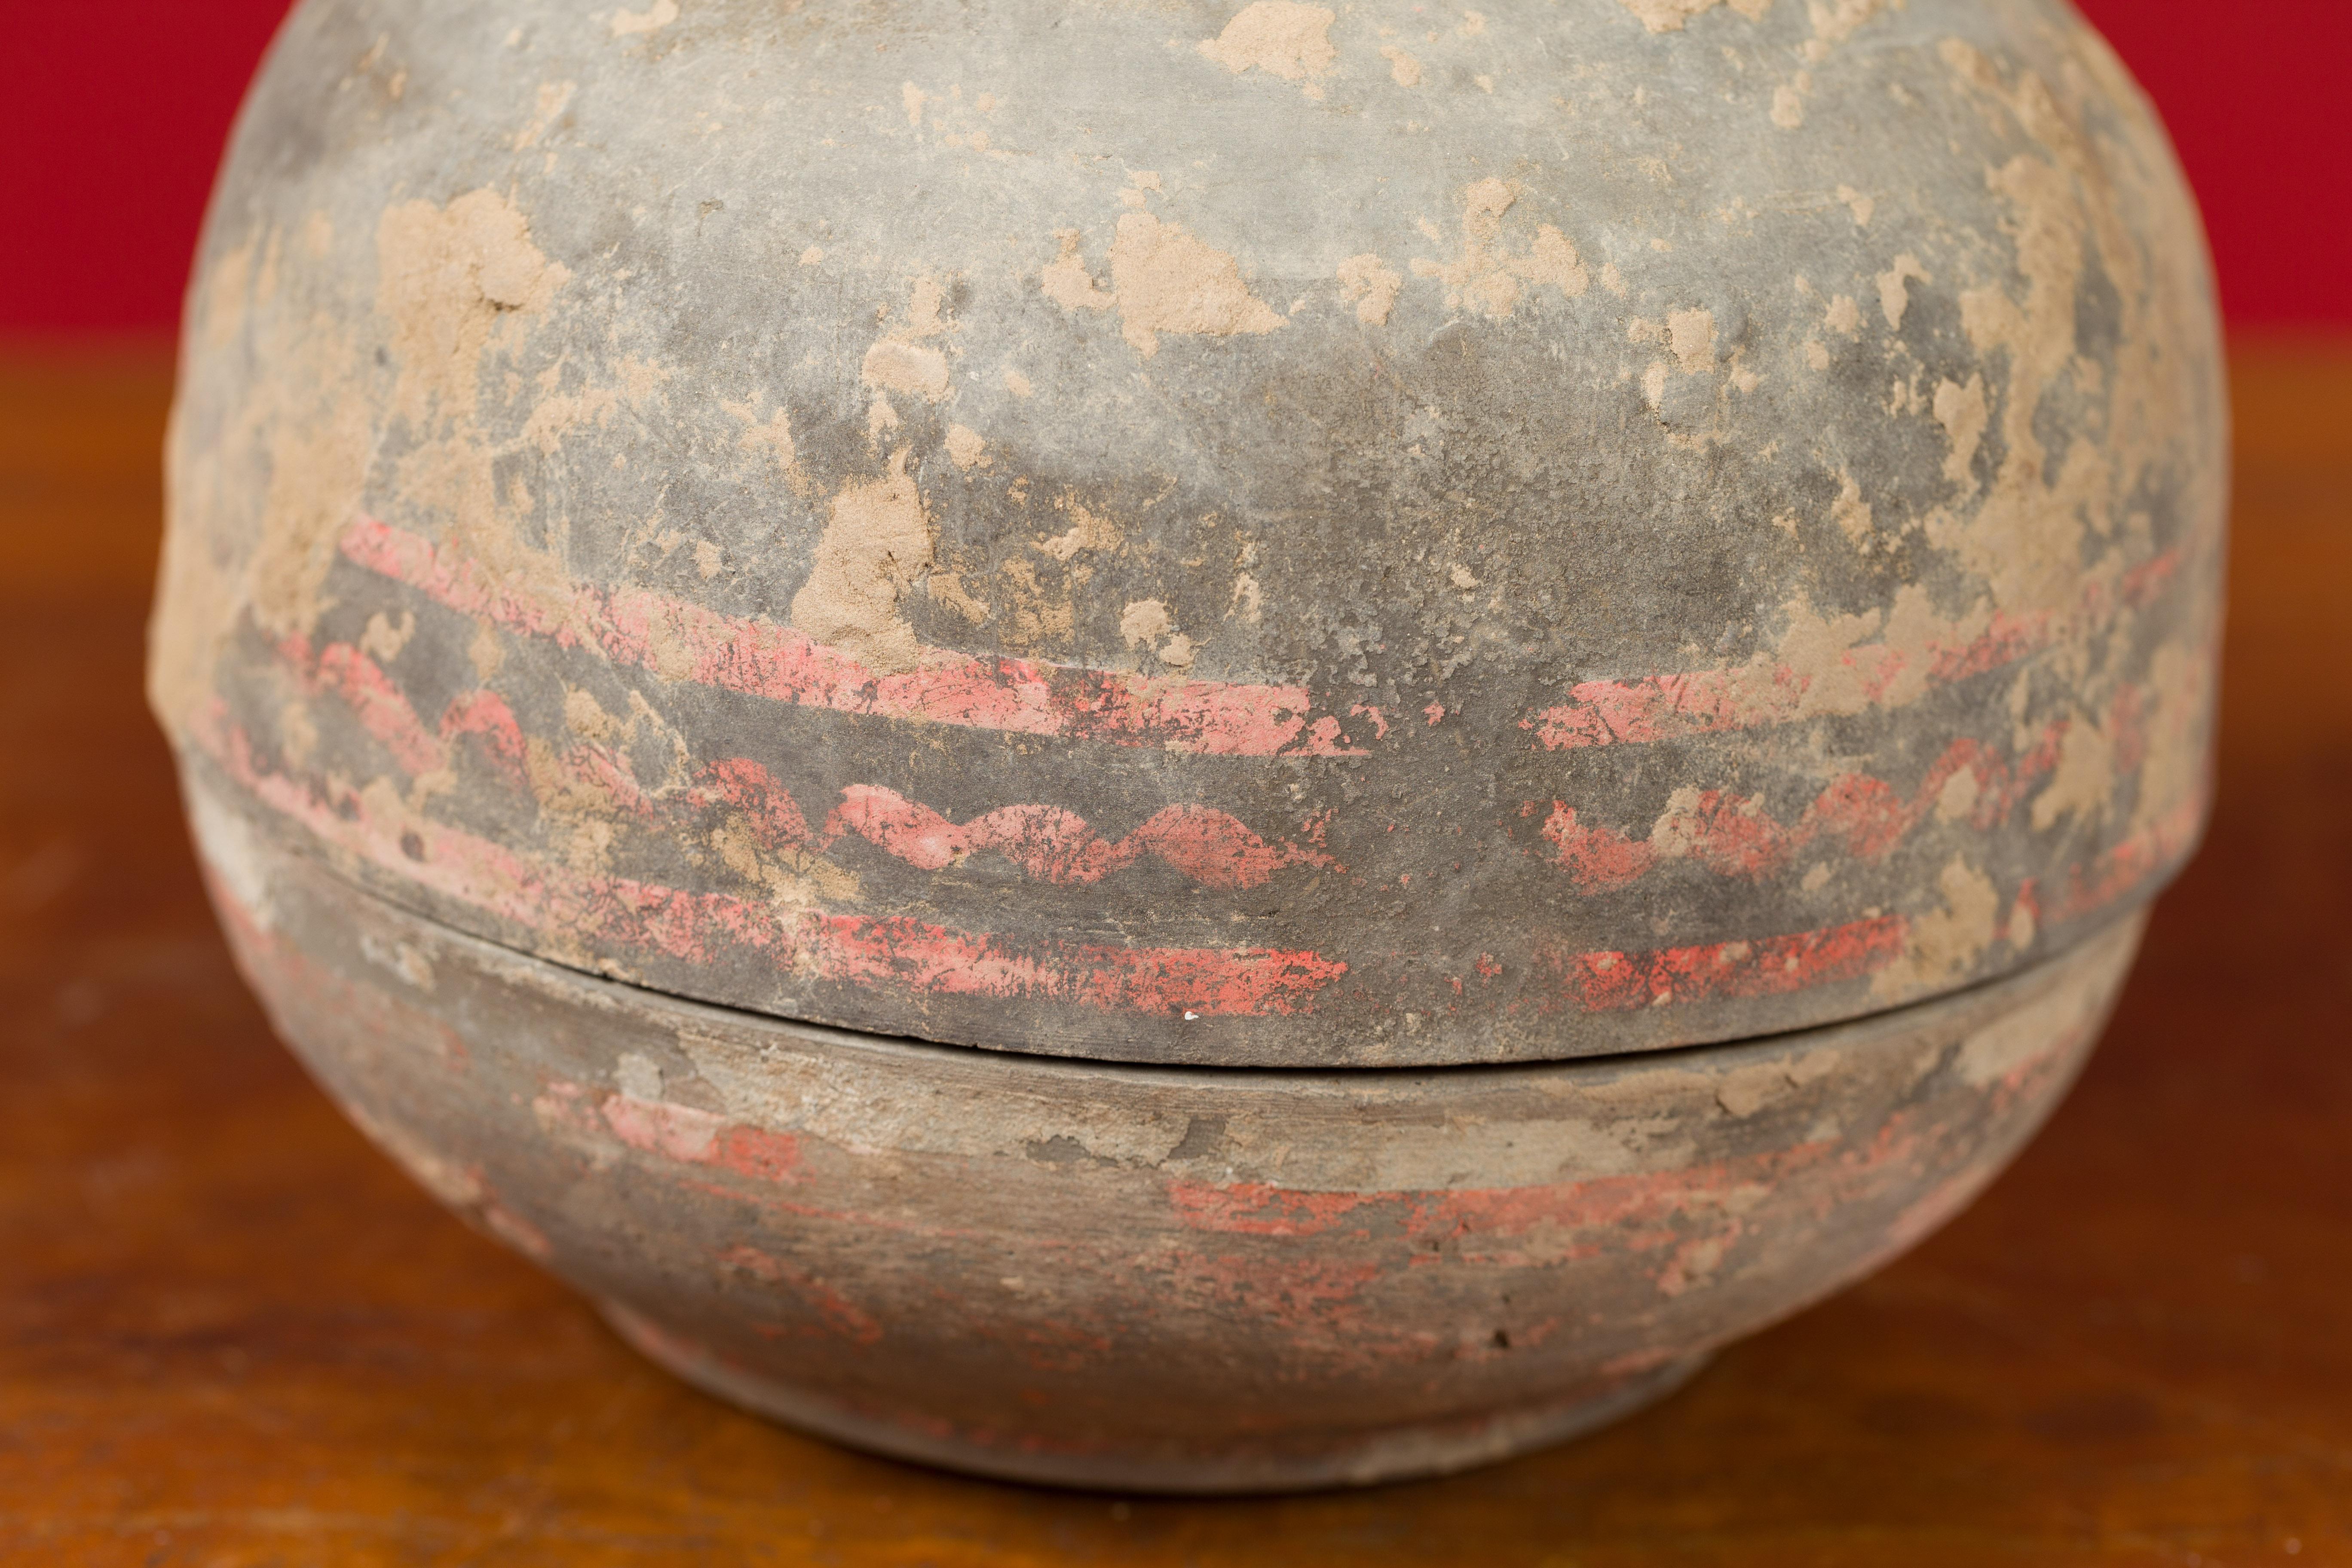 Terracotta Petite Chinese Han Dynasty Lidded Vessel with Original Paint circa 202 BC-200 AD